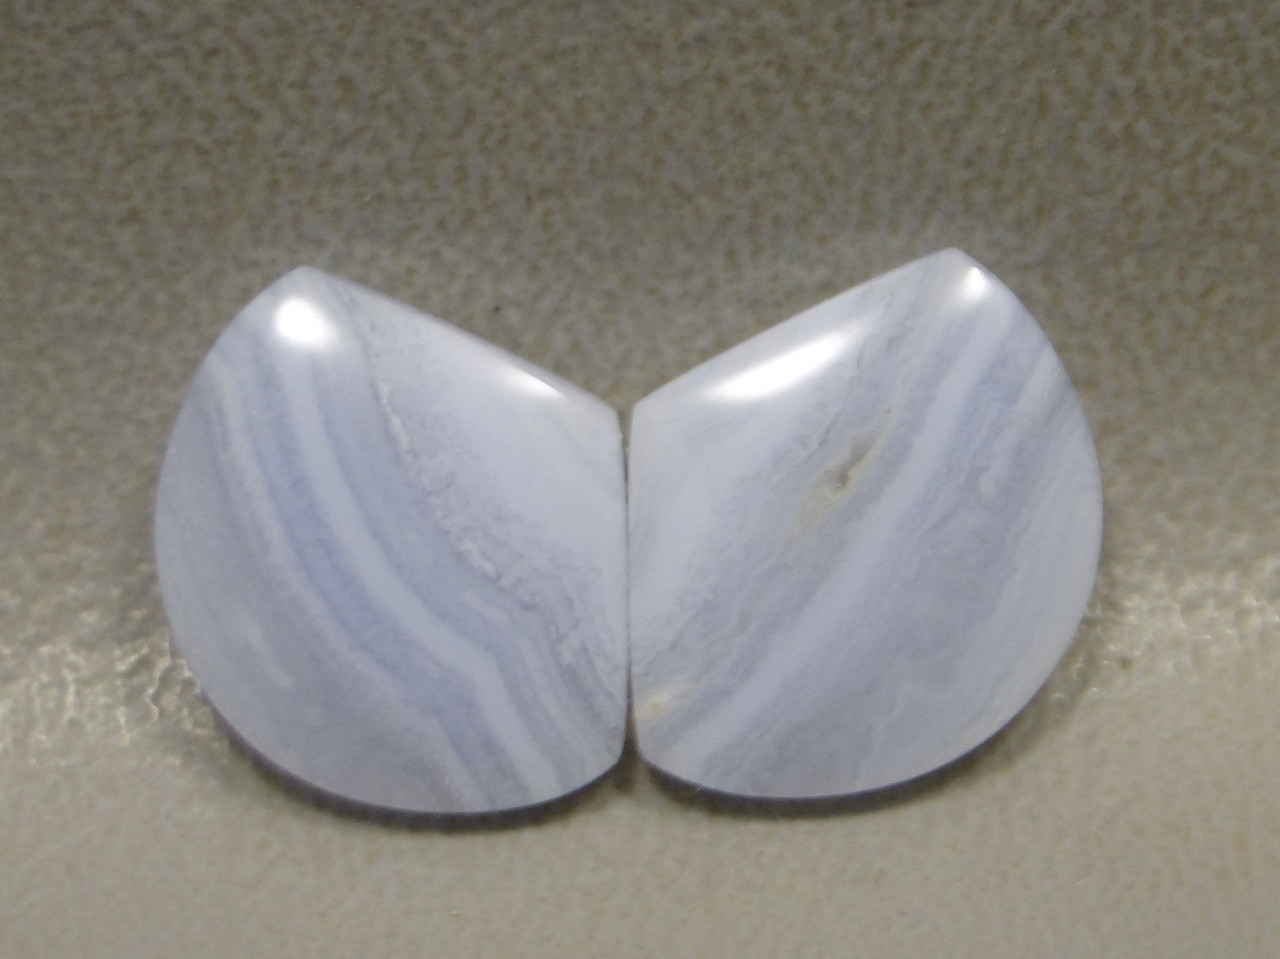 Blue Lace Agate Cabochons Matched Pair Designer Gemstone  #20